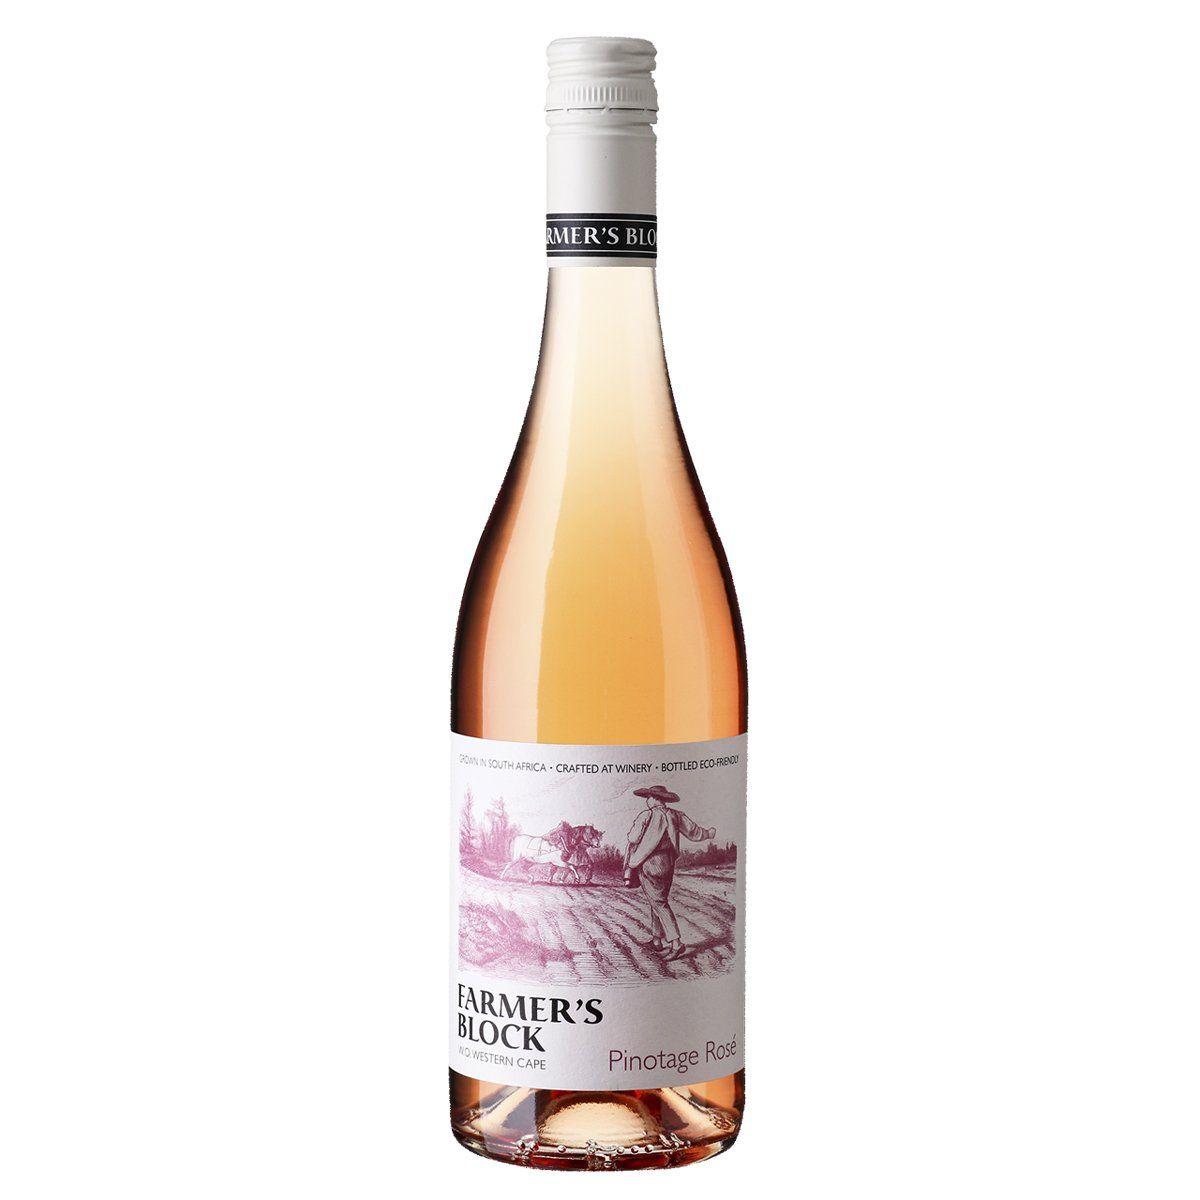 Farmer's Block Pinotage Rose 2019 - Bloom Concept